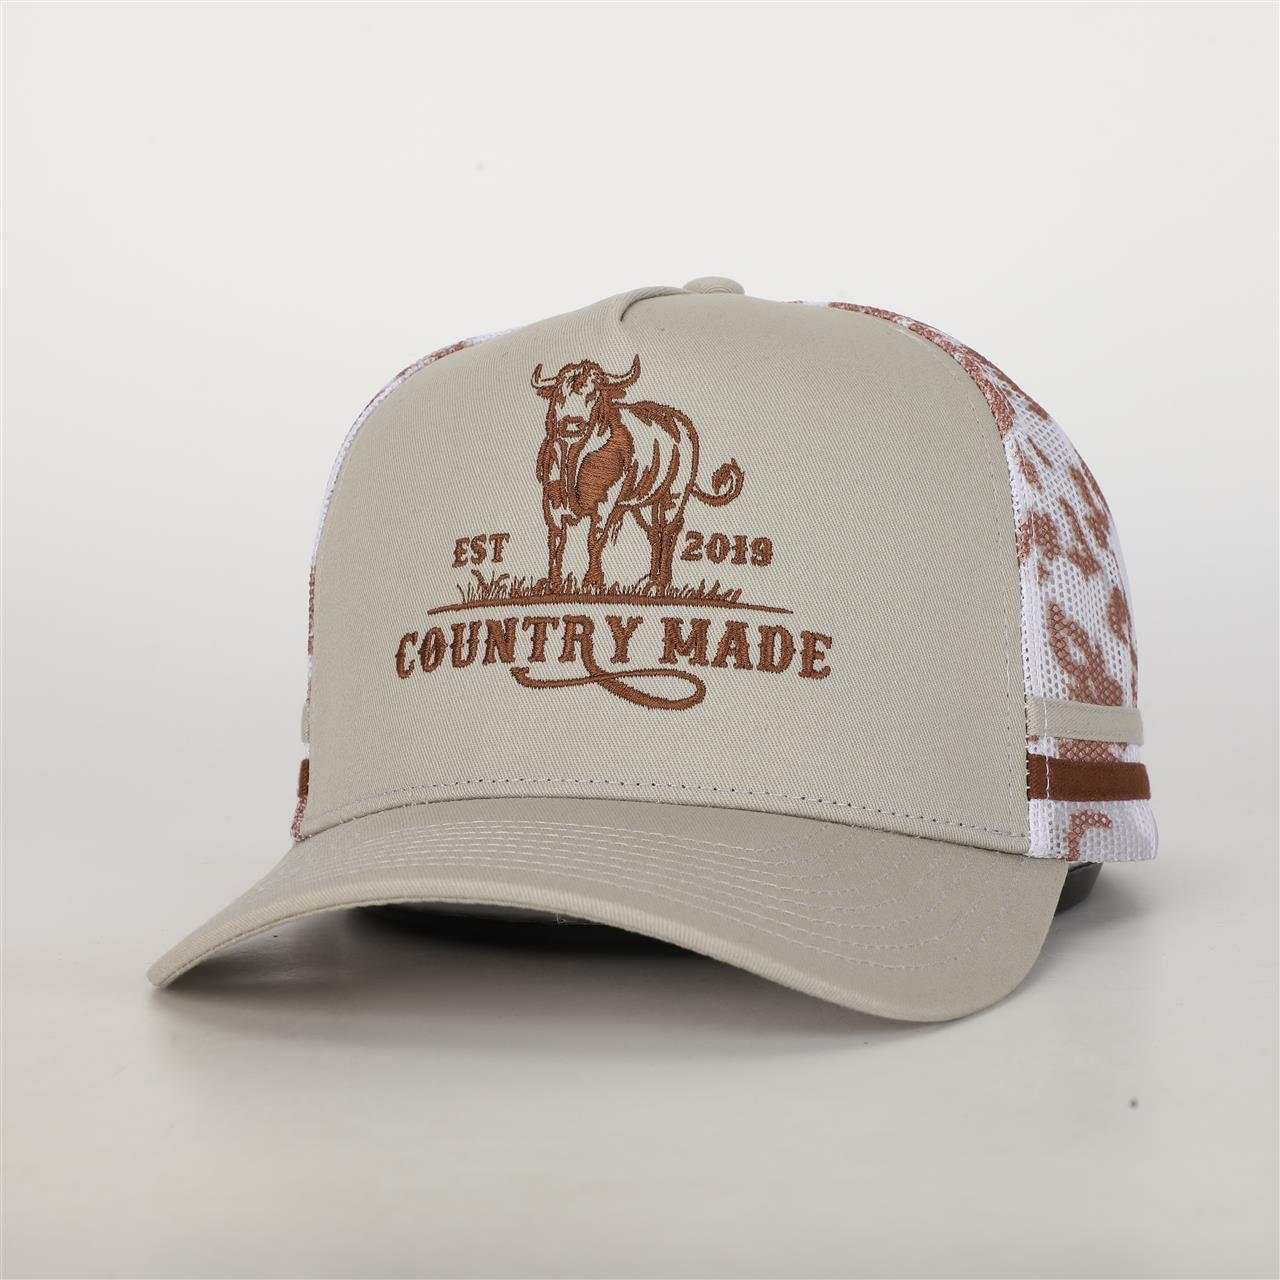 Truckers Hat, Country Made, BULL NEW